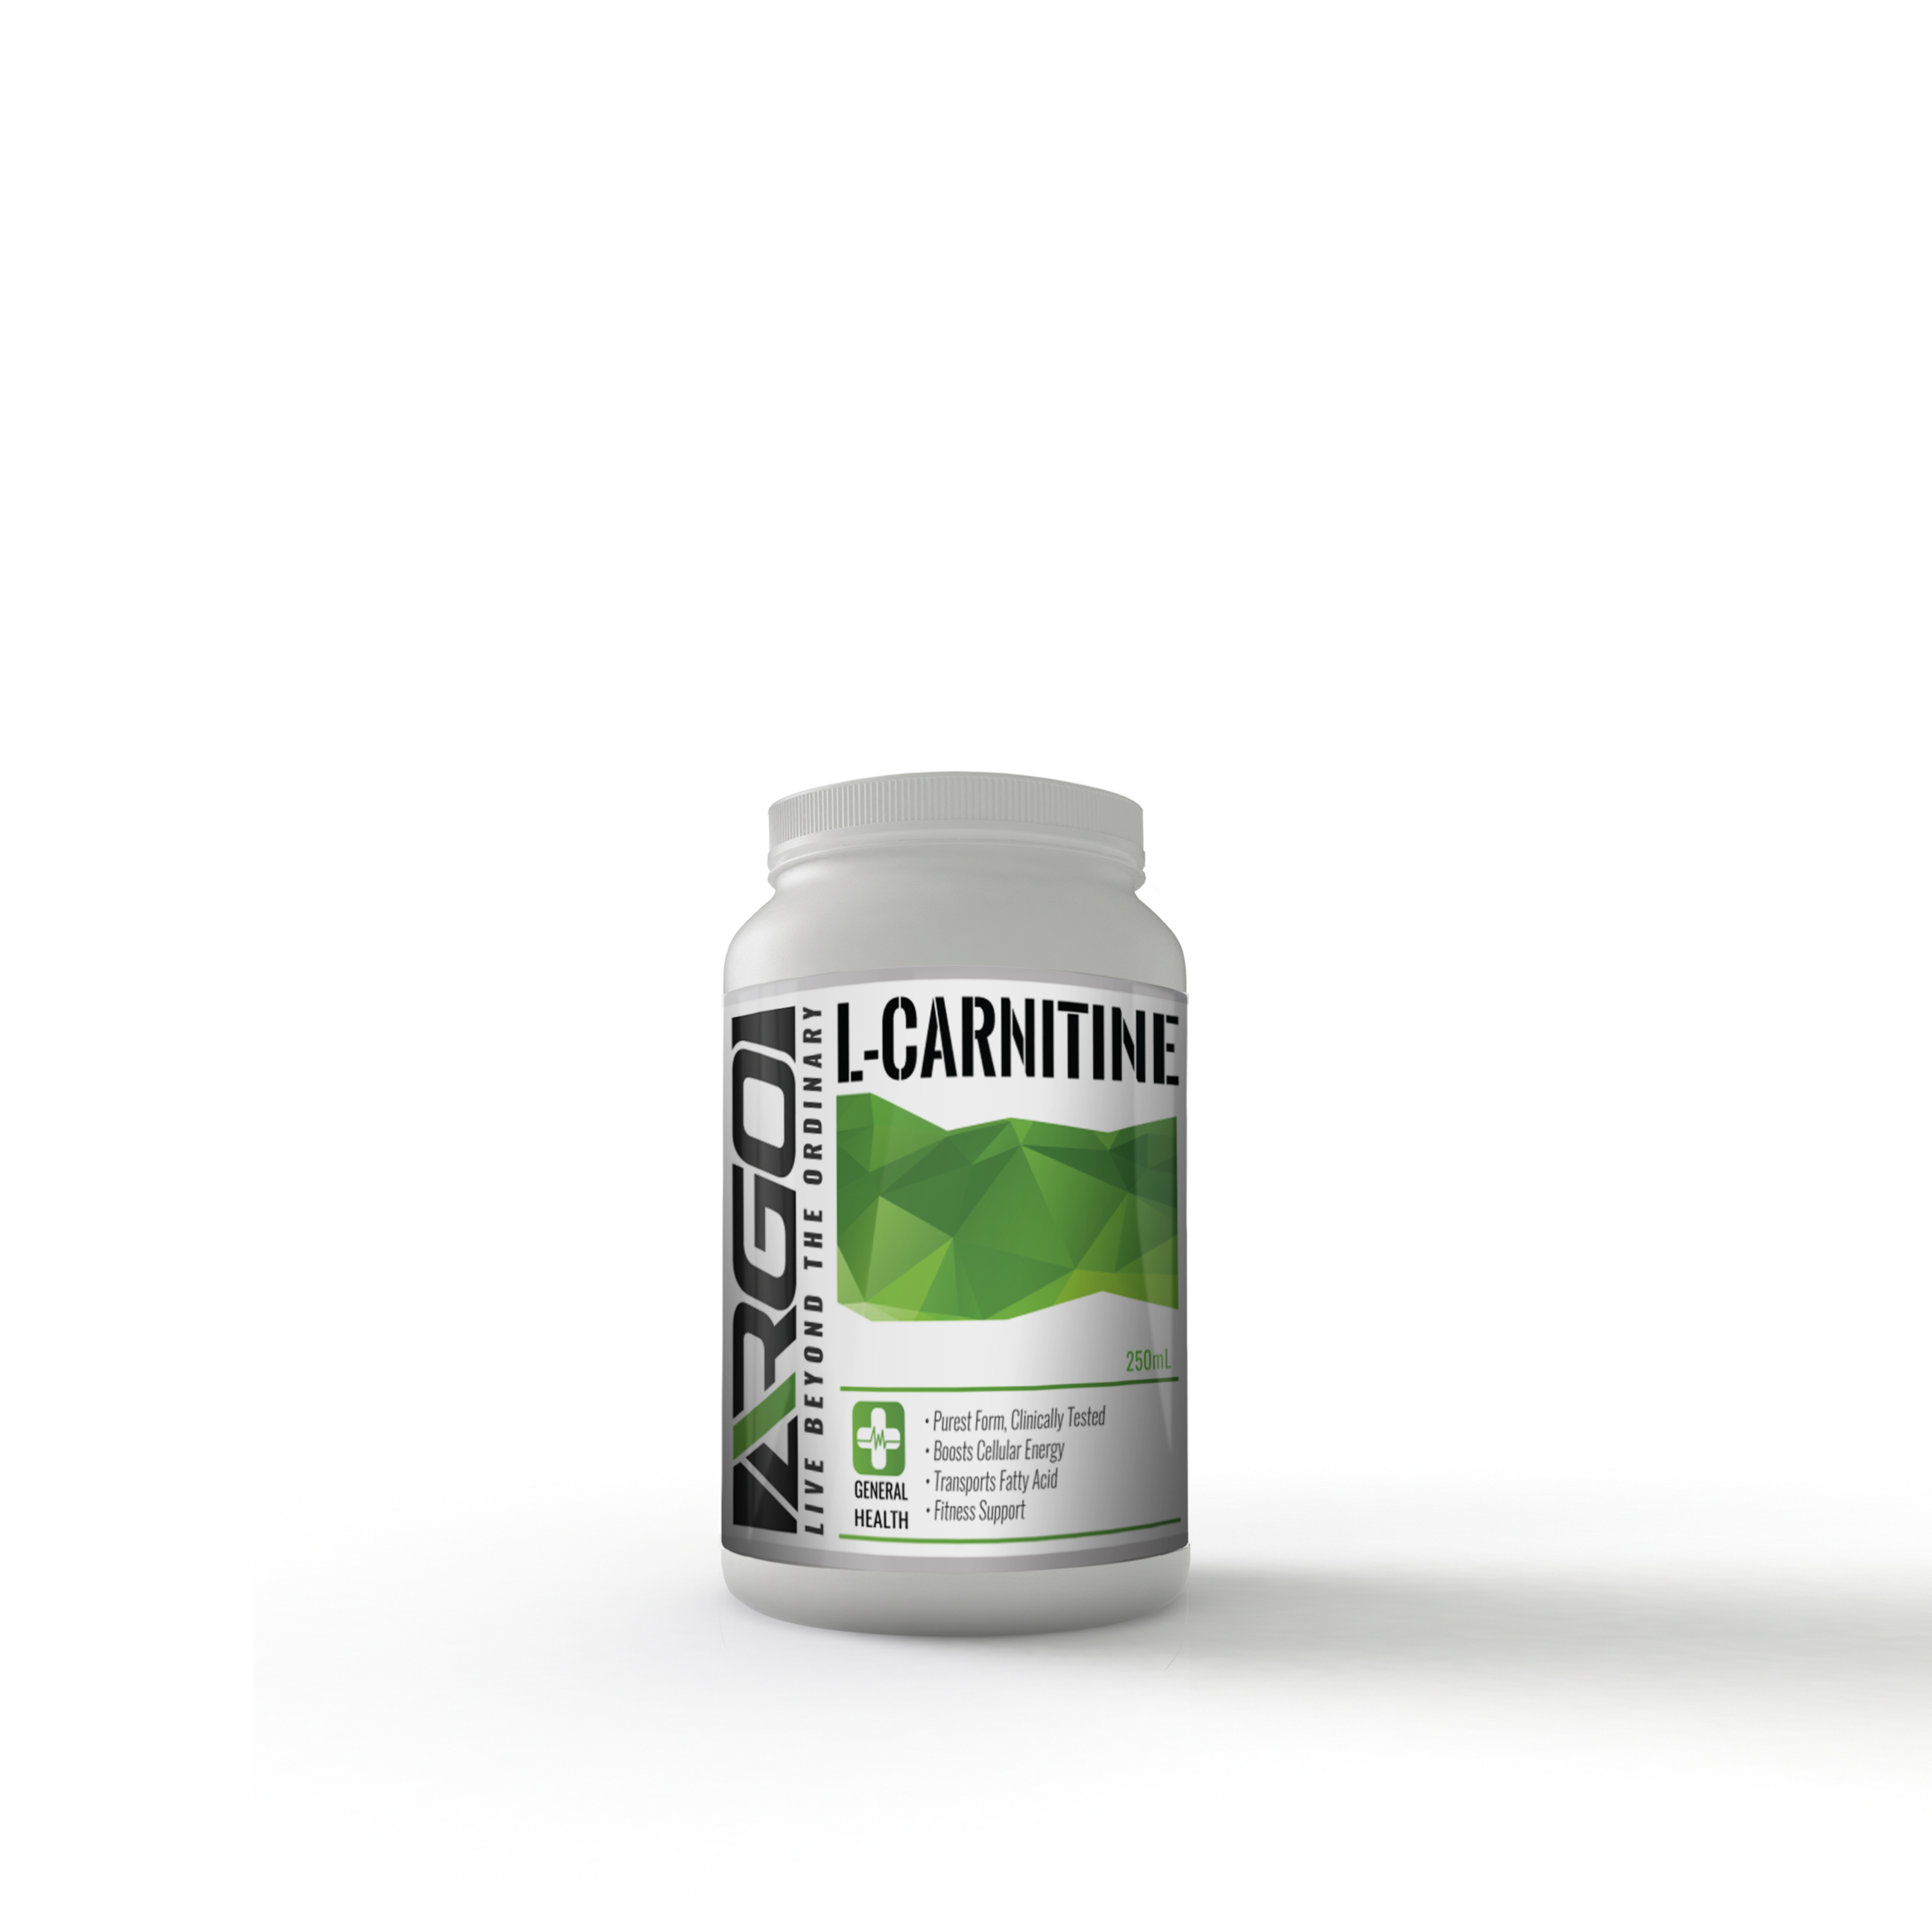 ARGO Fitness L CARNITINE WEIGHTLOSS CAPSULE image